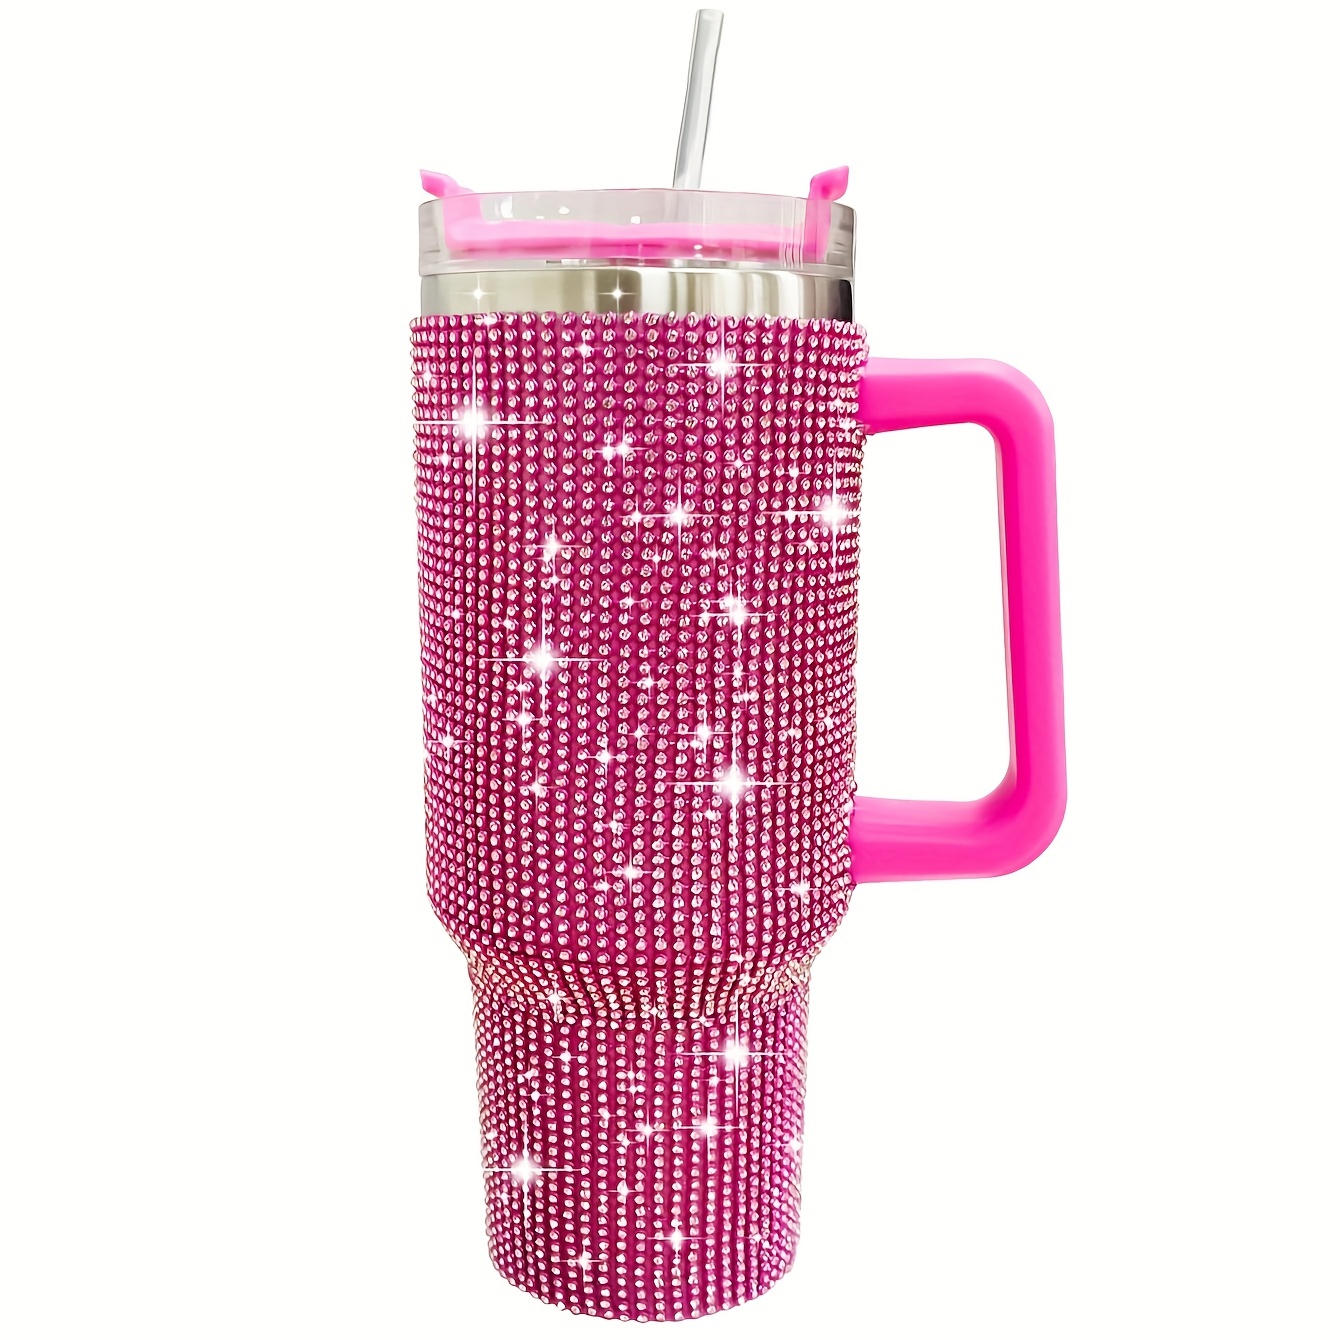 Light Pink Stanley Cup Dupe 40oz Reusable Stainless Steel Tumbler With Straw